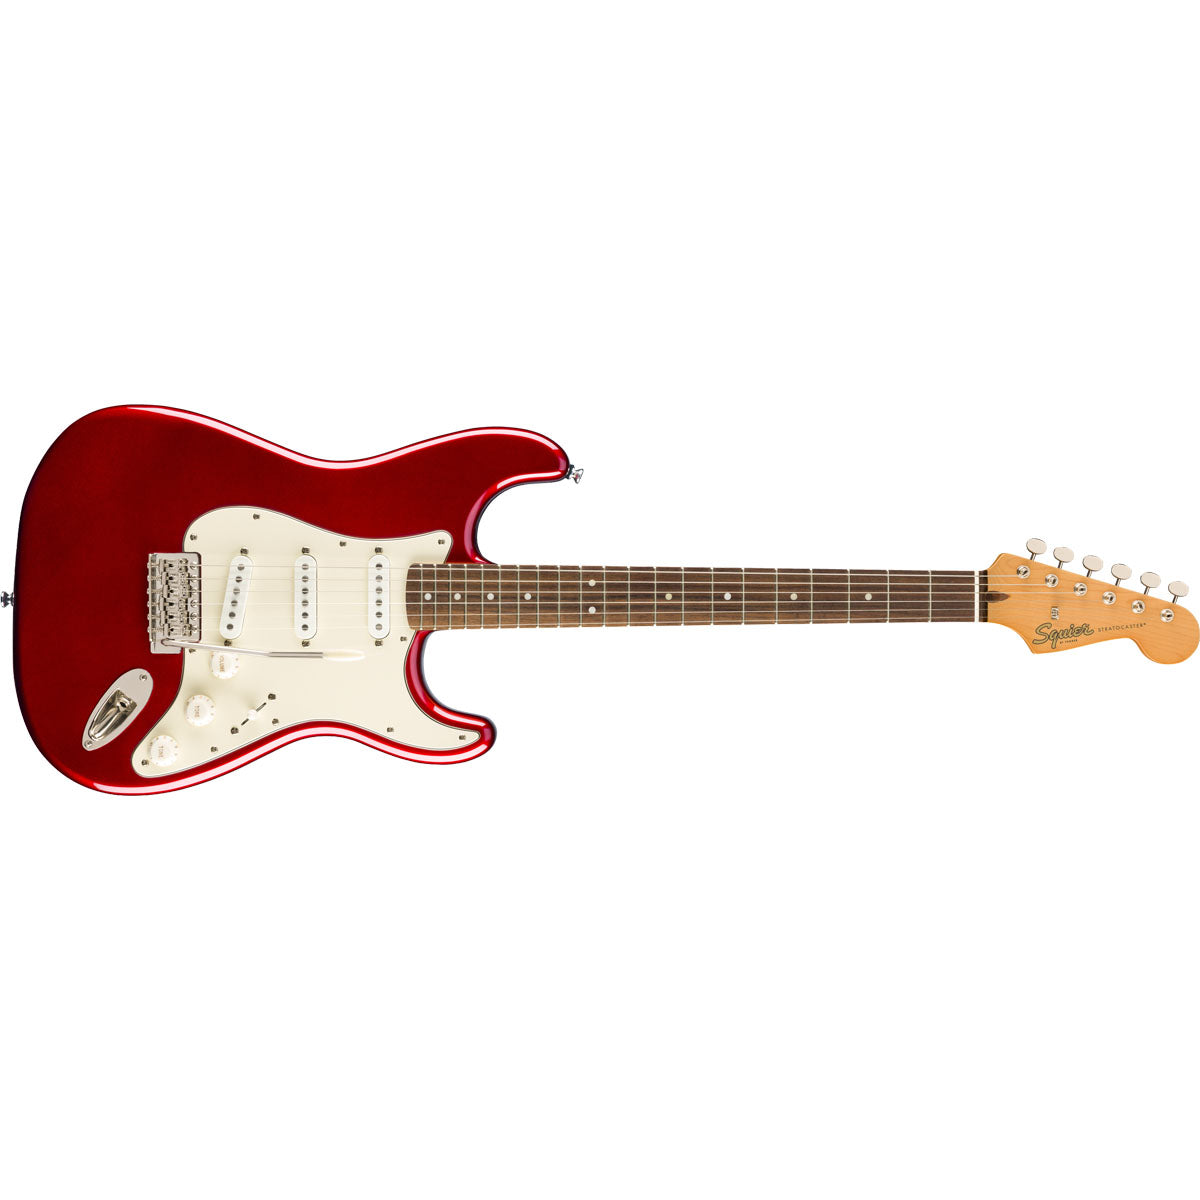 Fender Squier Classic Vibe 60s Stratocaster Electric Guitar Candy Apple Red - 0374010509